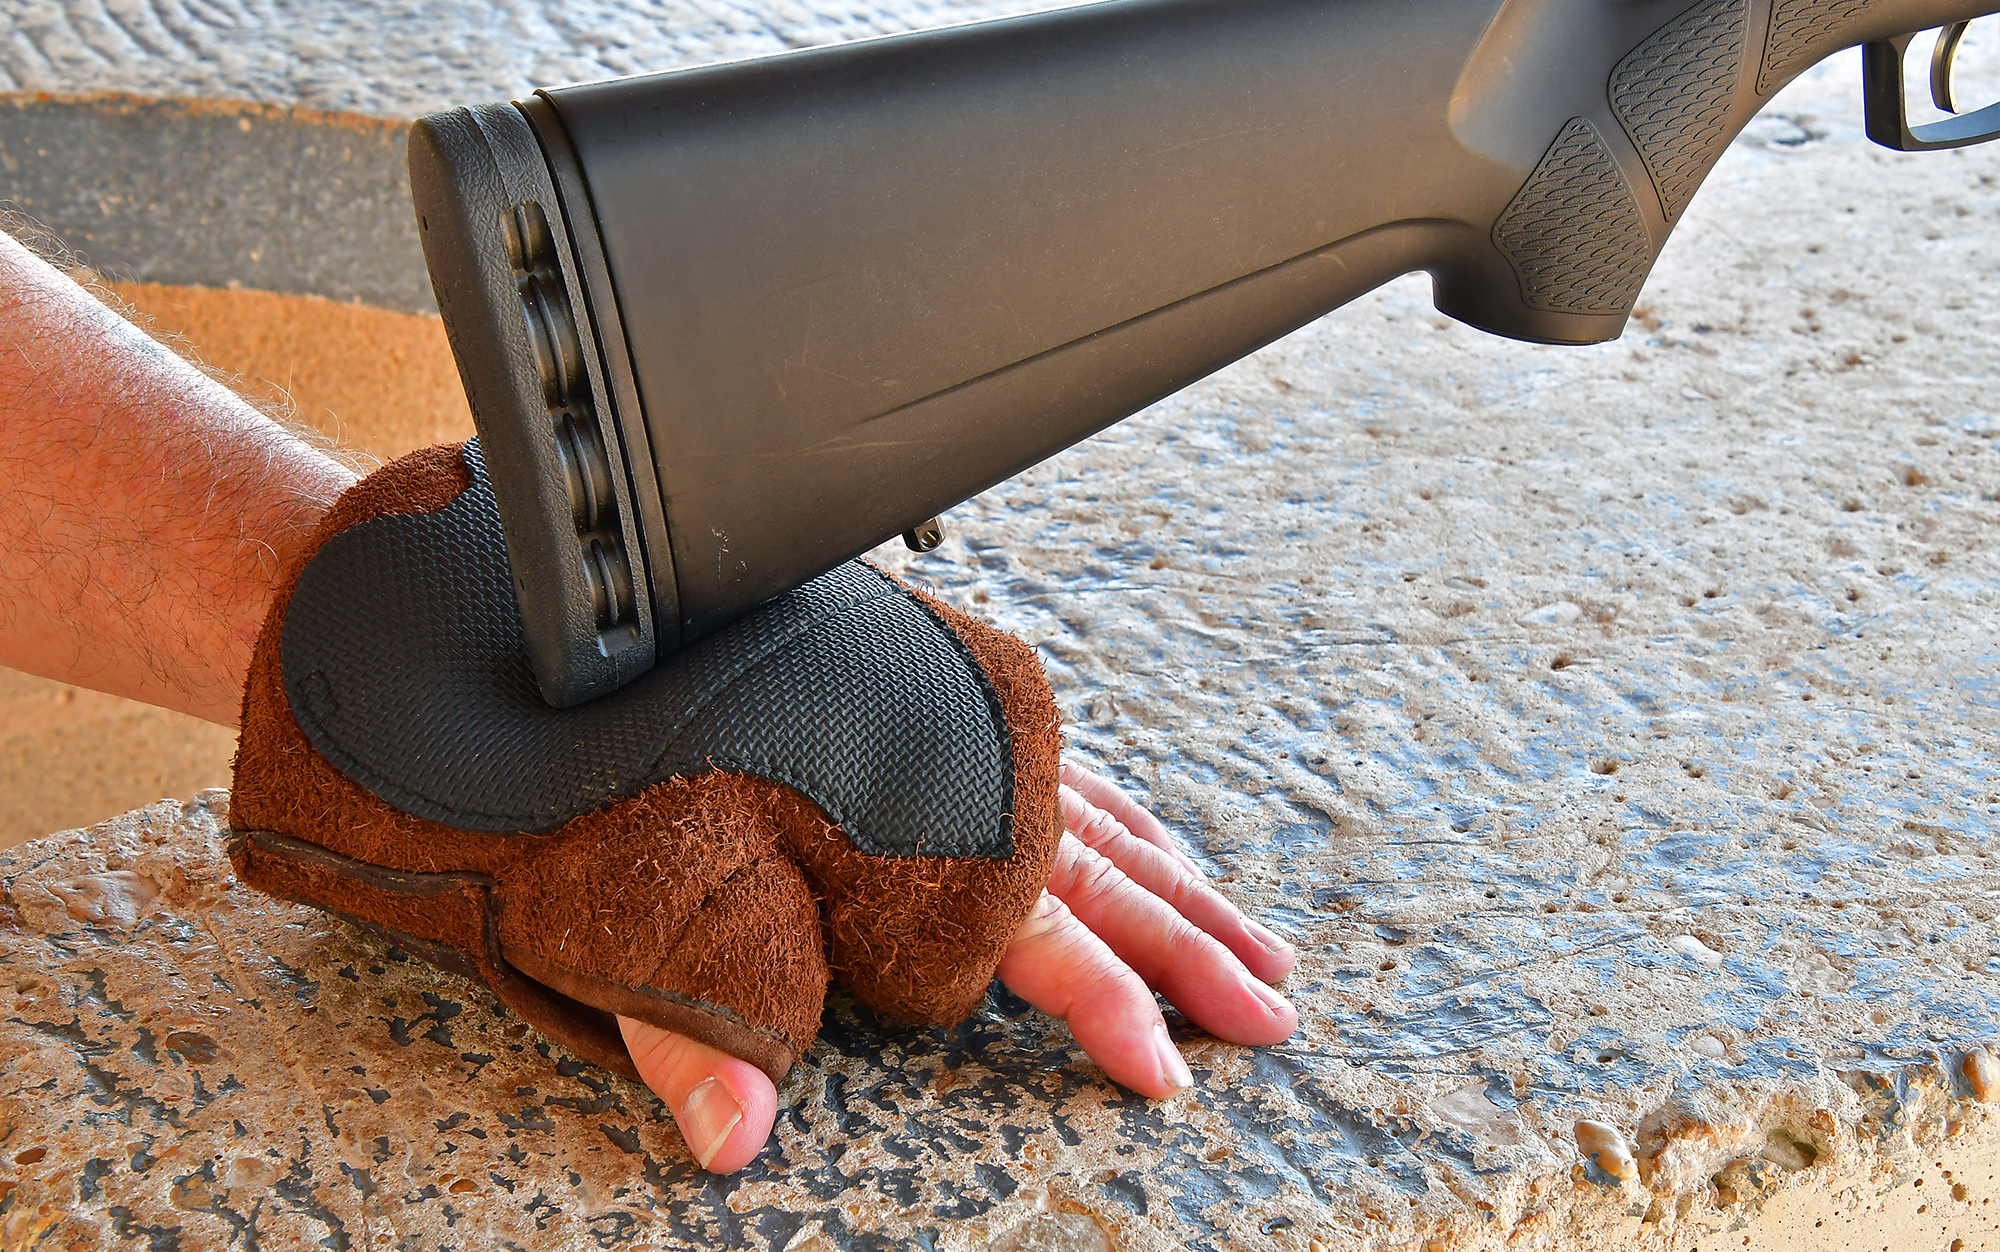 You can shoot from the FTW SAAM Ambidextrous Dog Paw using a fist or flat hand.